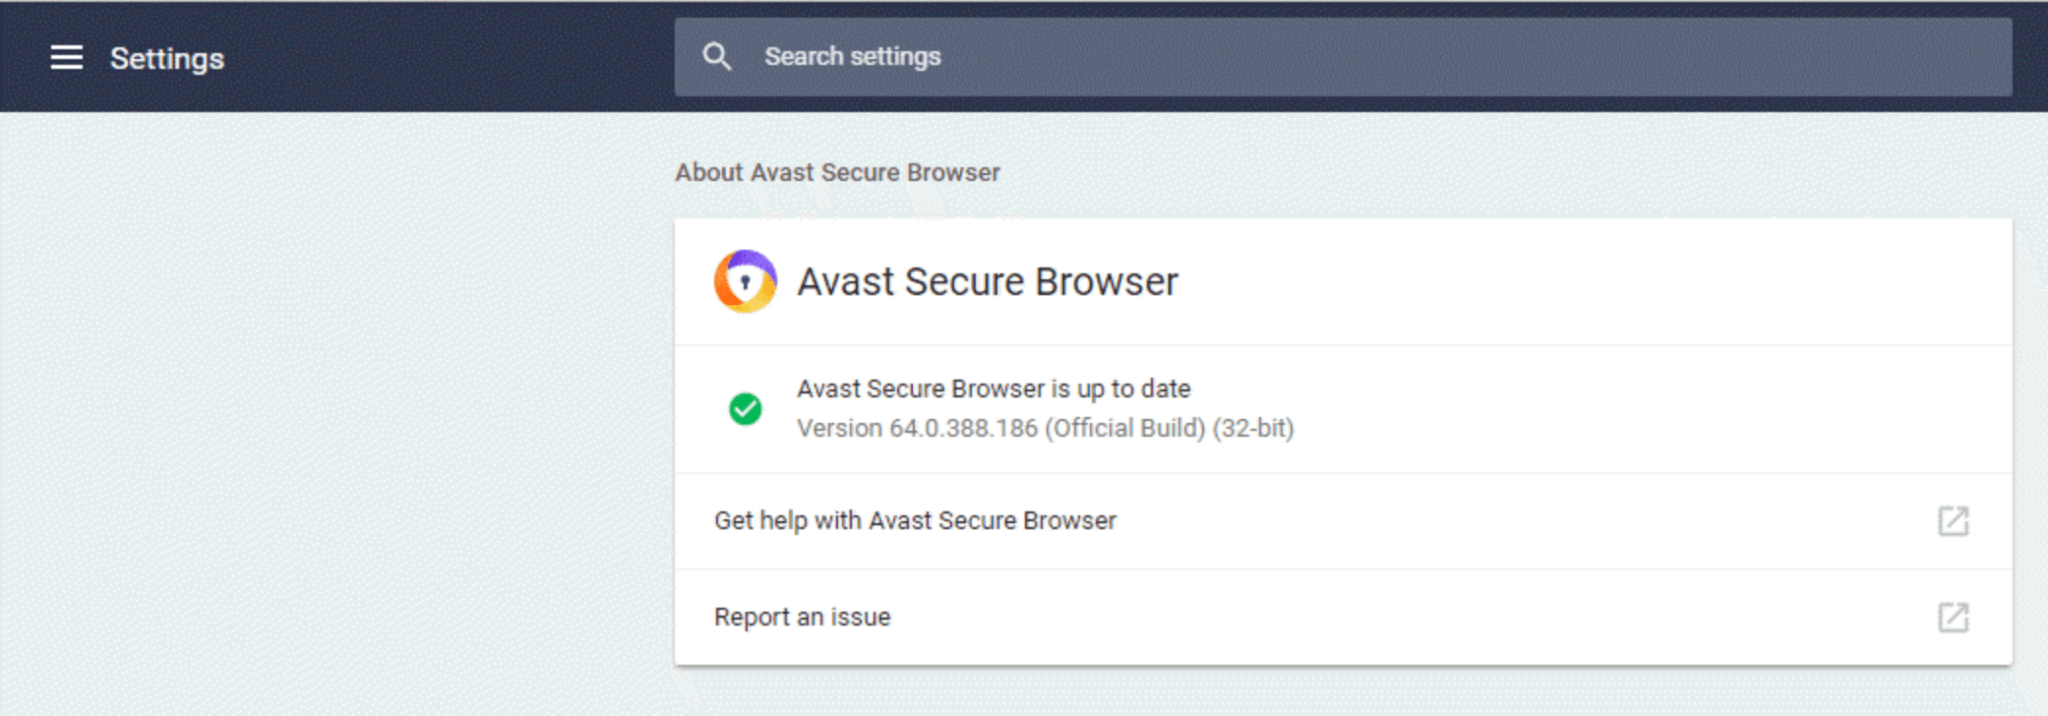 how to remove avast password manager